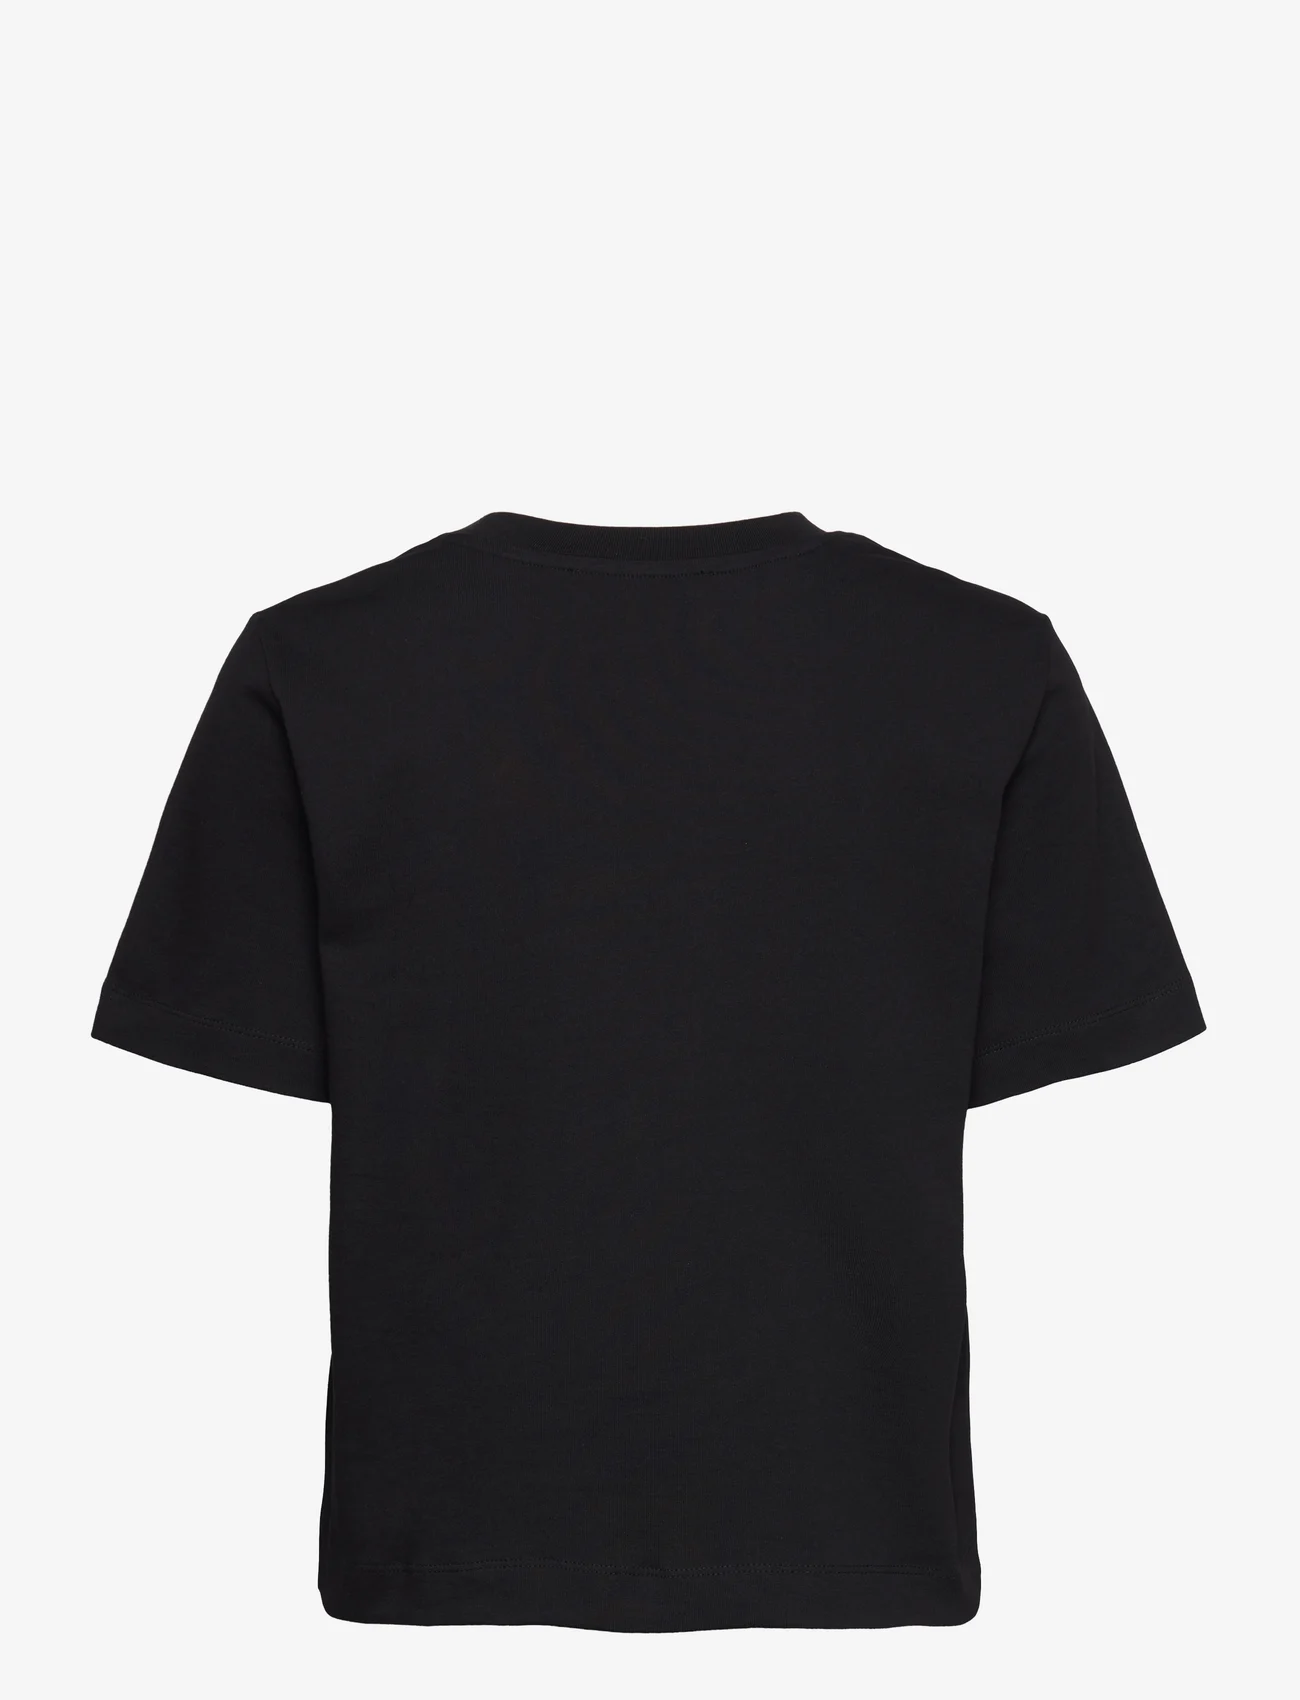 Selected Femme - SLFESSENTIAL SS BOXY TEE NOOS - t-shirts - black - 1